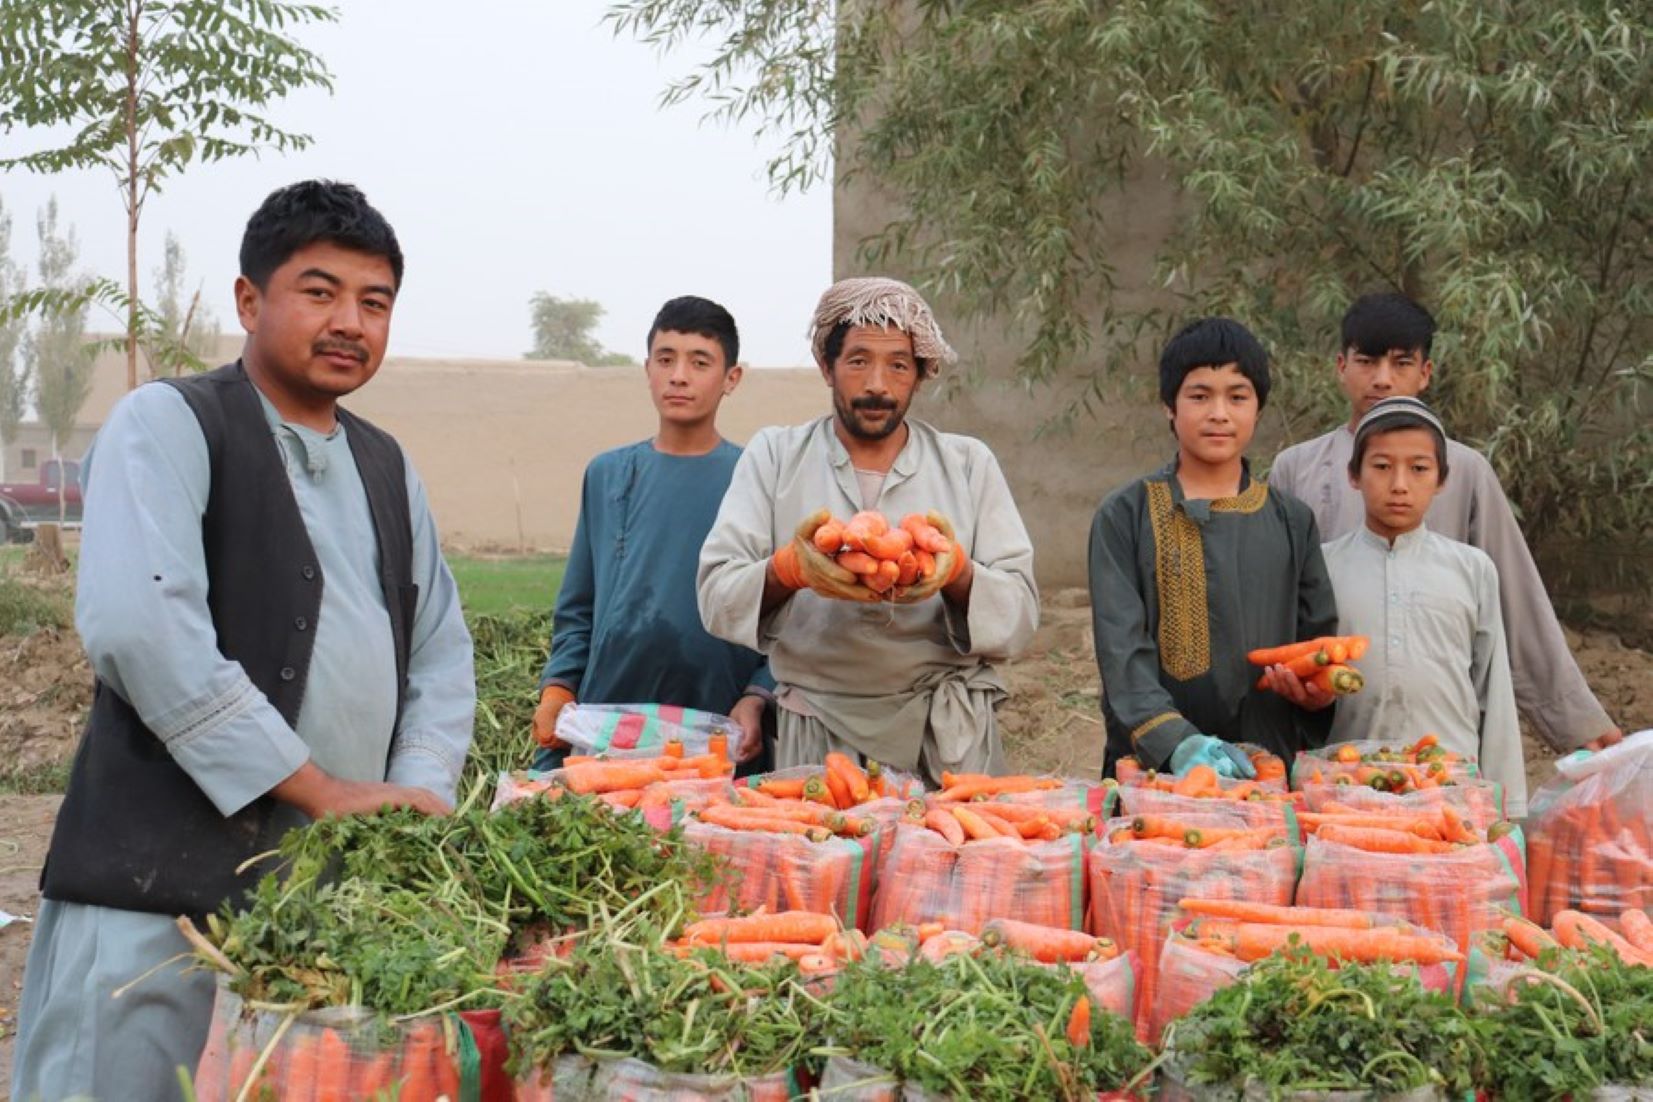 Afghanistan Expects To Achieve Self-Sufficiency Within Three Years: Minister